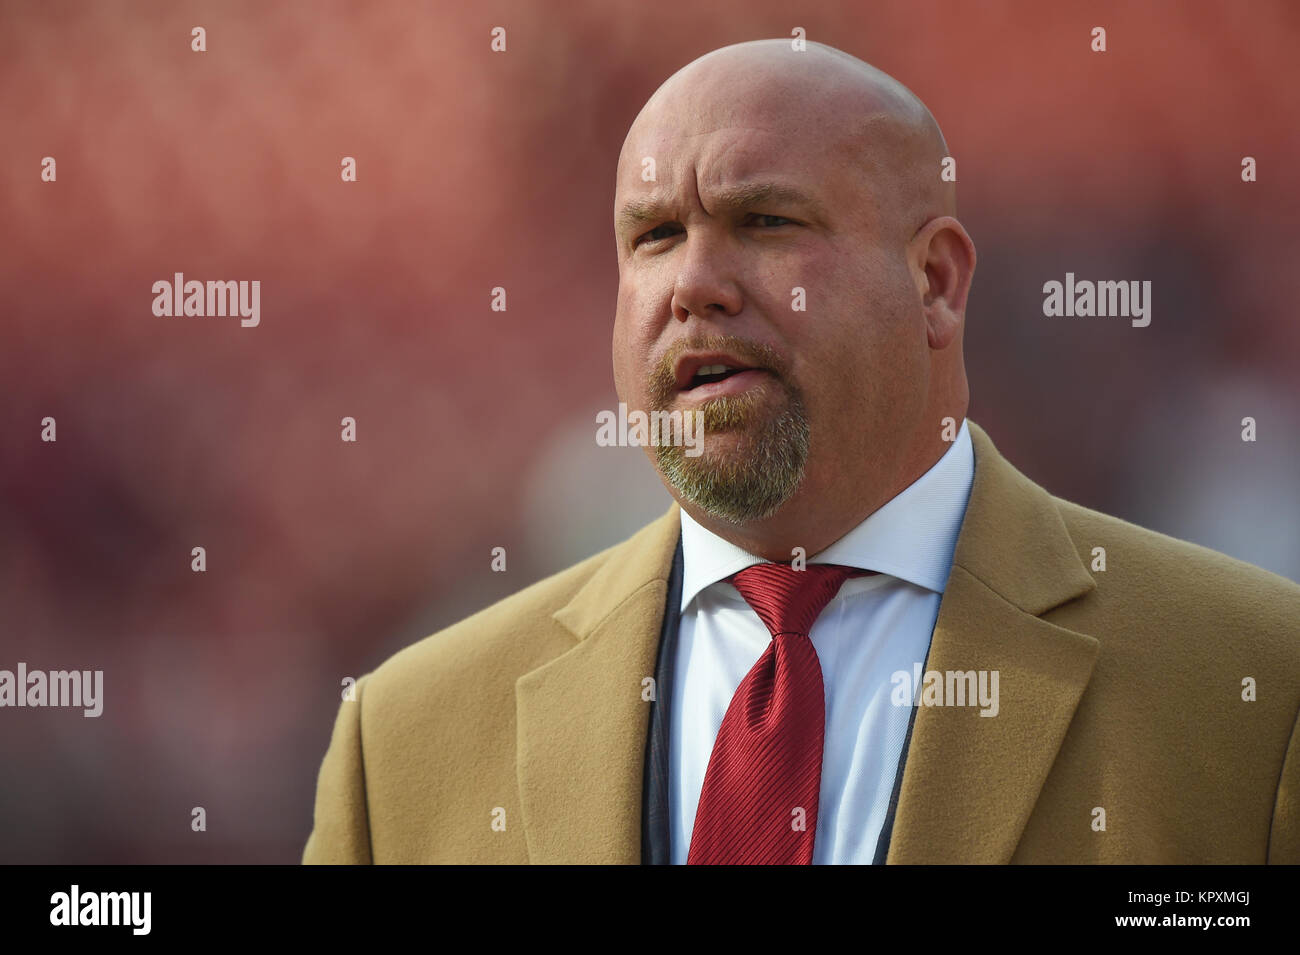 DEC 17 2017 : Arizona Cardinals General Manager Steve Keim walks the field prior the matchup between the Arizona Cardinals and the Washington Redskins at FedEx Field in Landover, MD. Stock Photo